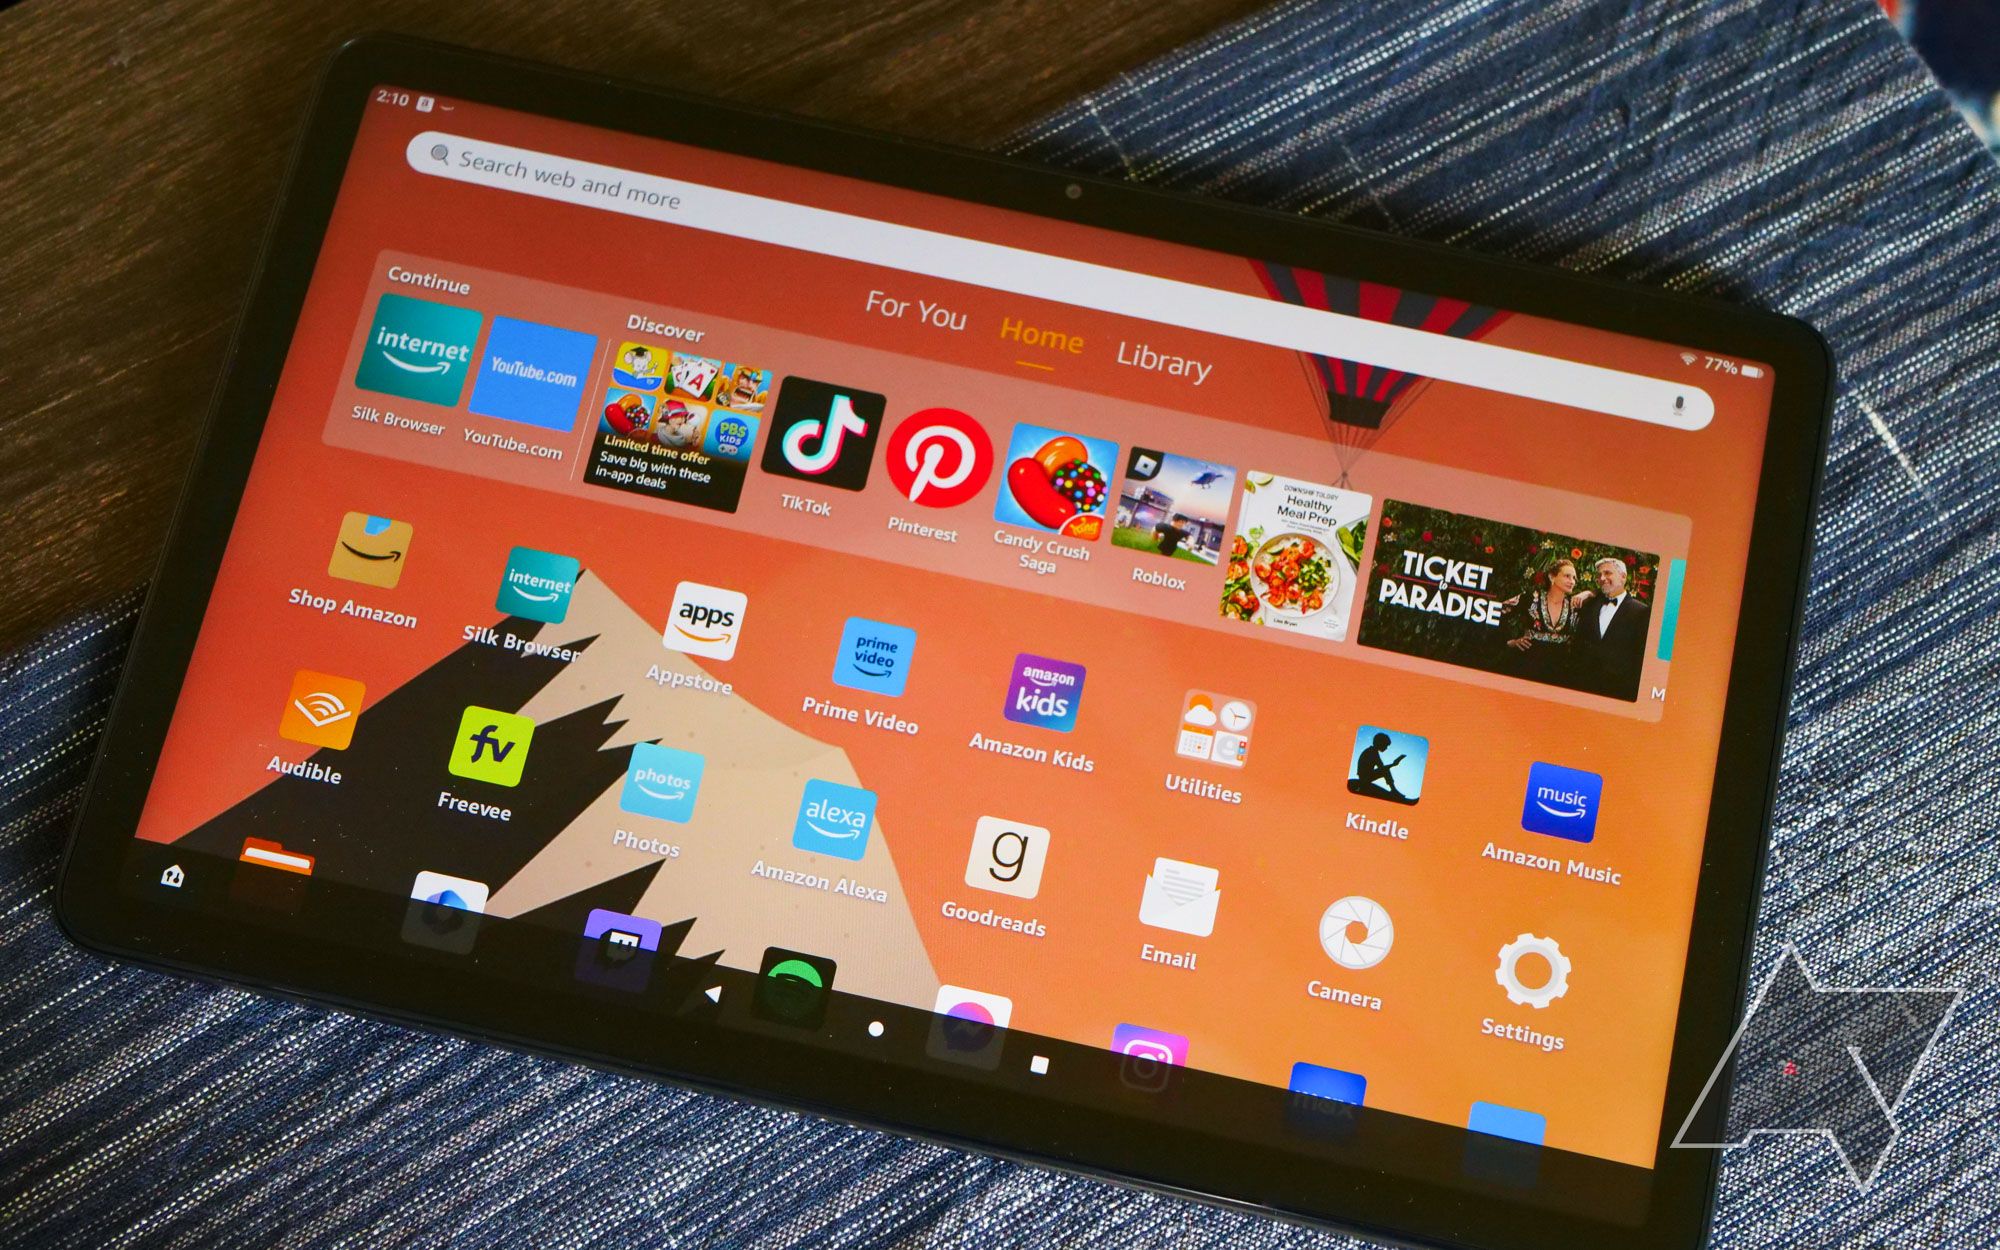 The Amazon Fire Max 11 tablet resting on top of a table with the apps list open.